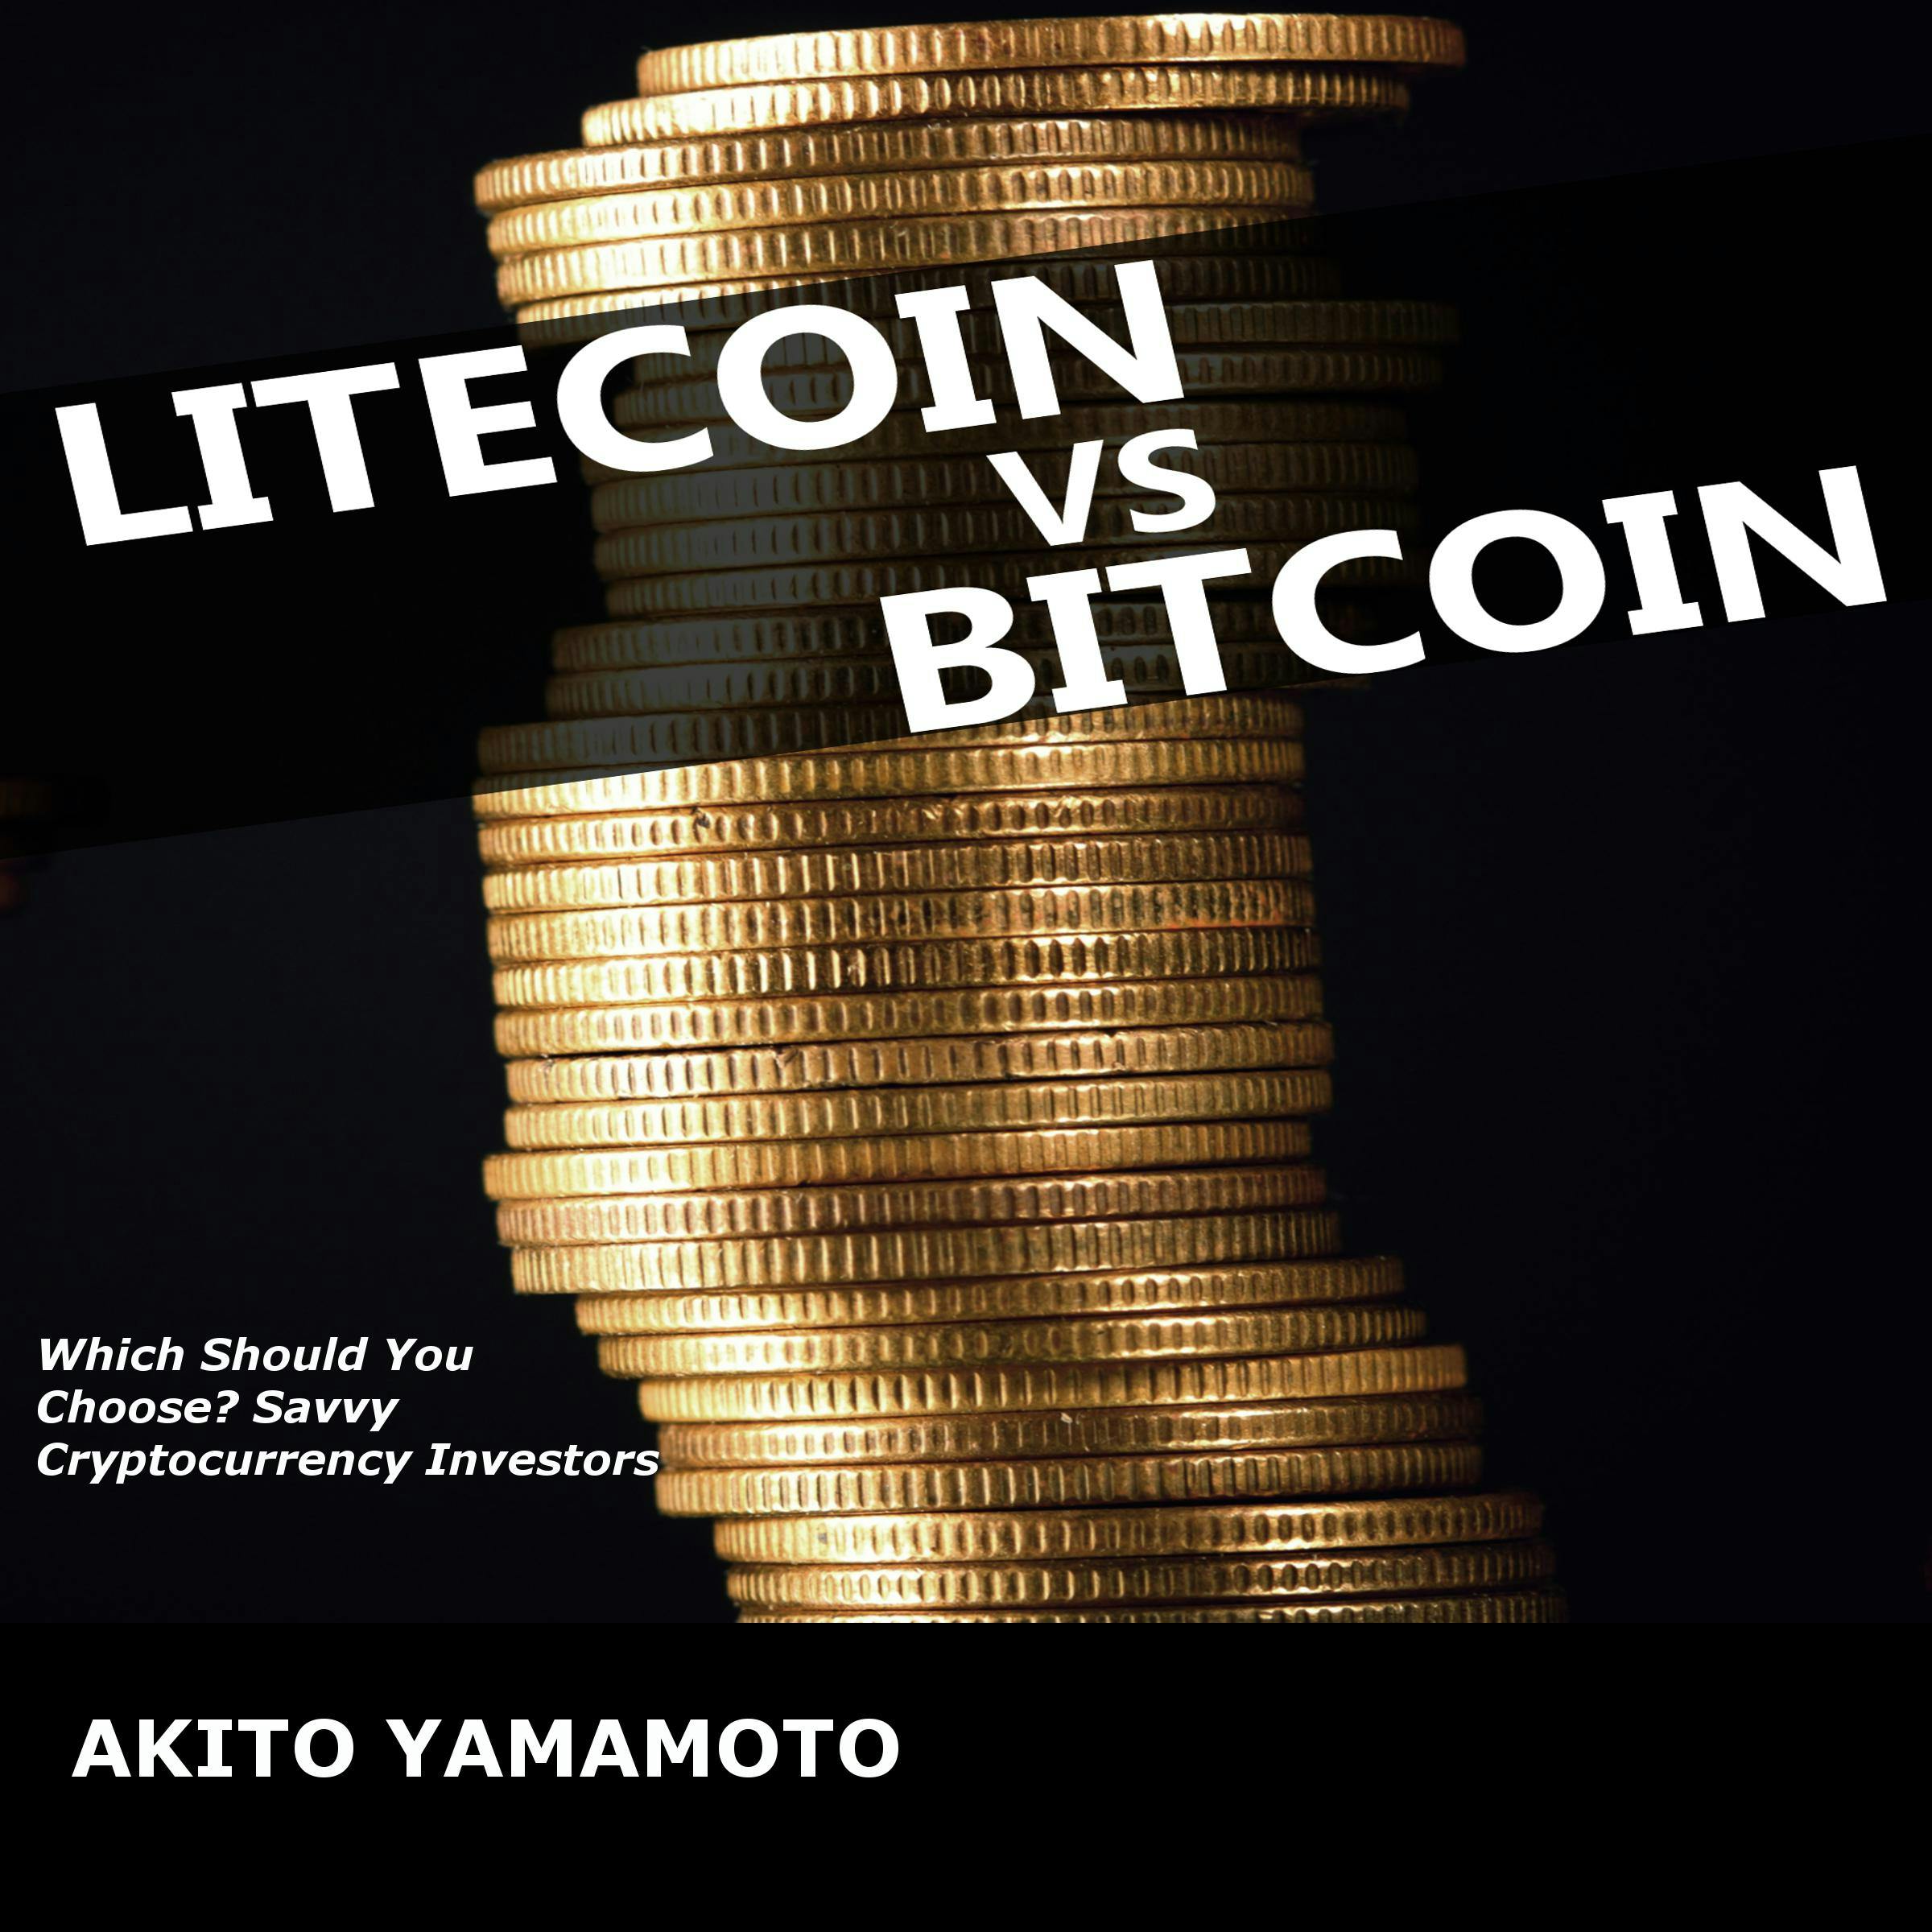 Lightcoin vs Bitcoin: Which Should You Choose Savvy Cryptocurrency Investors - Akito Yamamoto